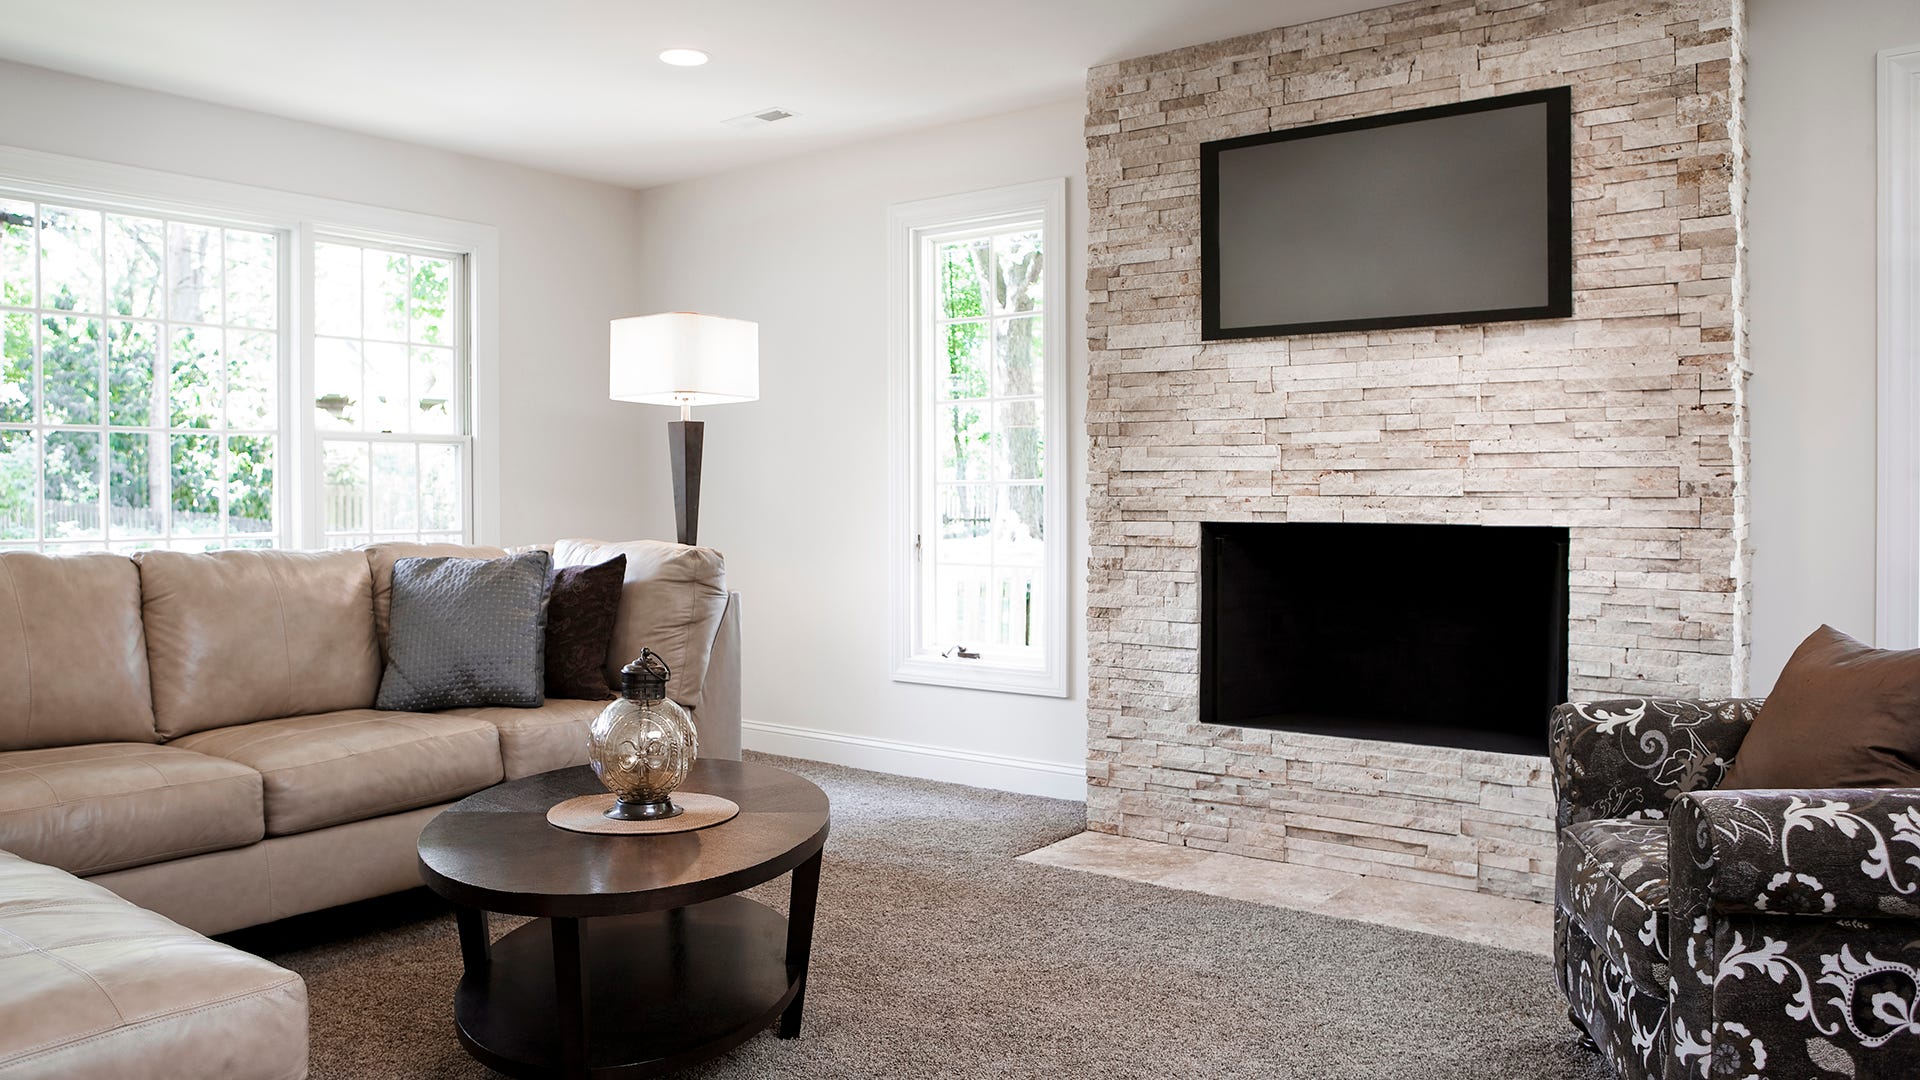 Don’t mount your TV above the fireplace: It’s one of the worst places for it